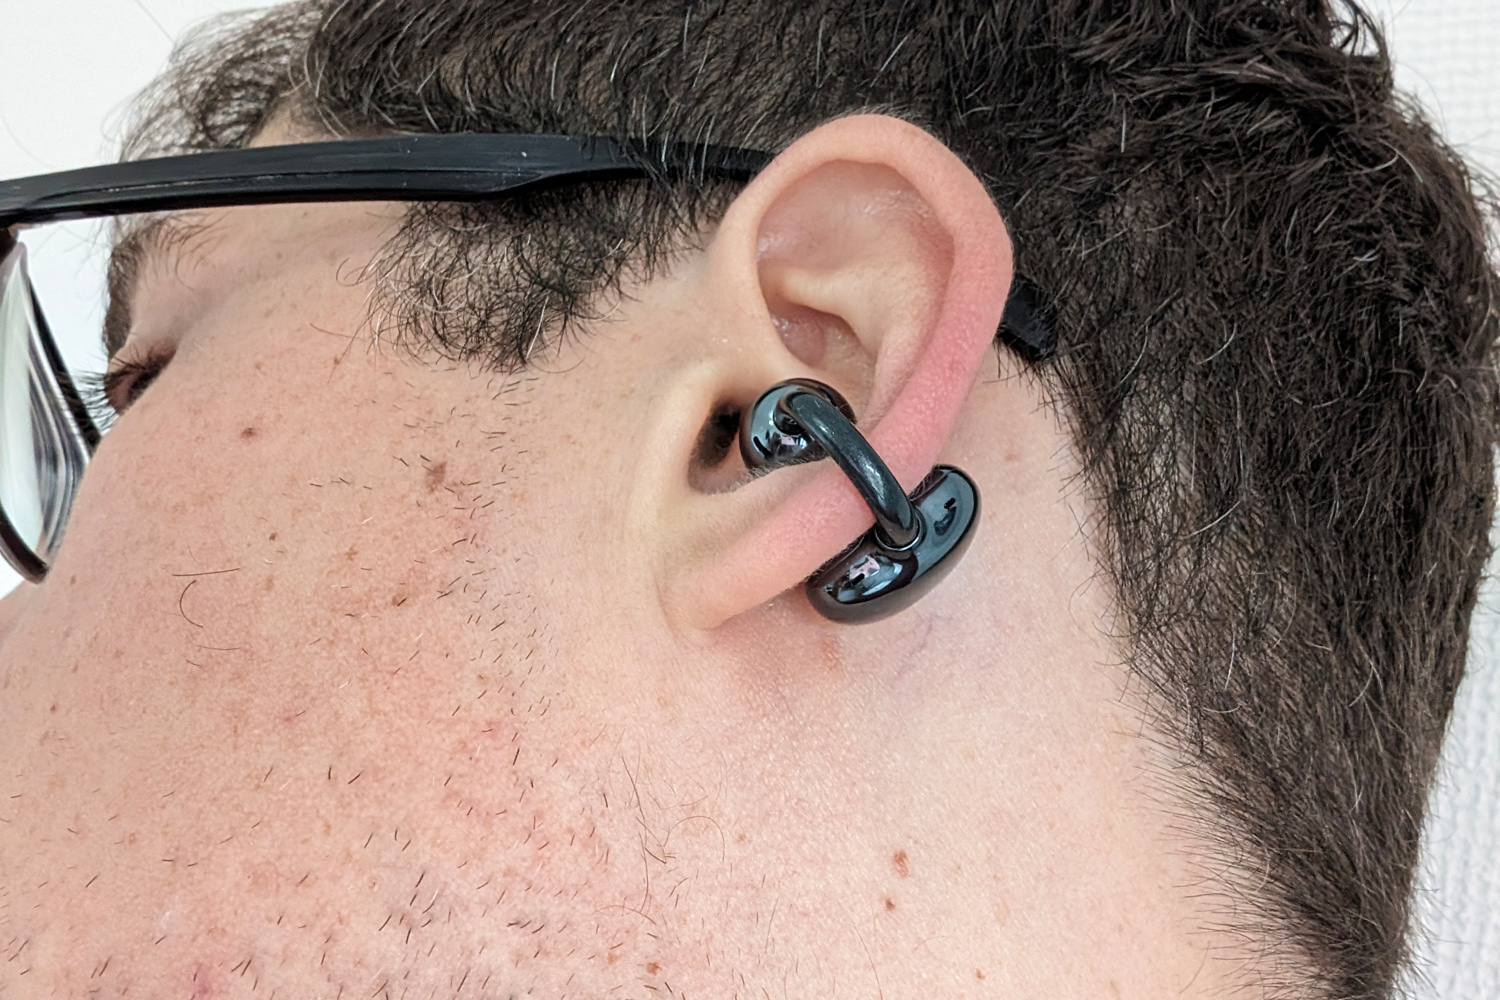 HUAWEI FreeClip review: The most comfortable wireless earbuds?